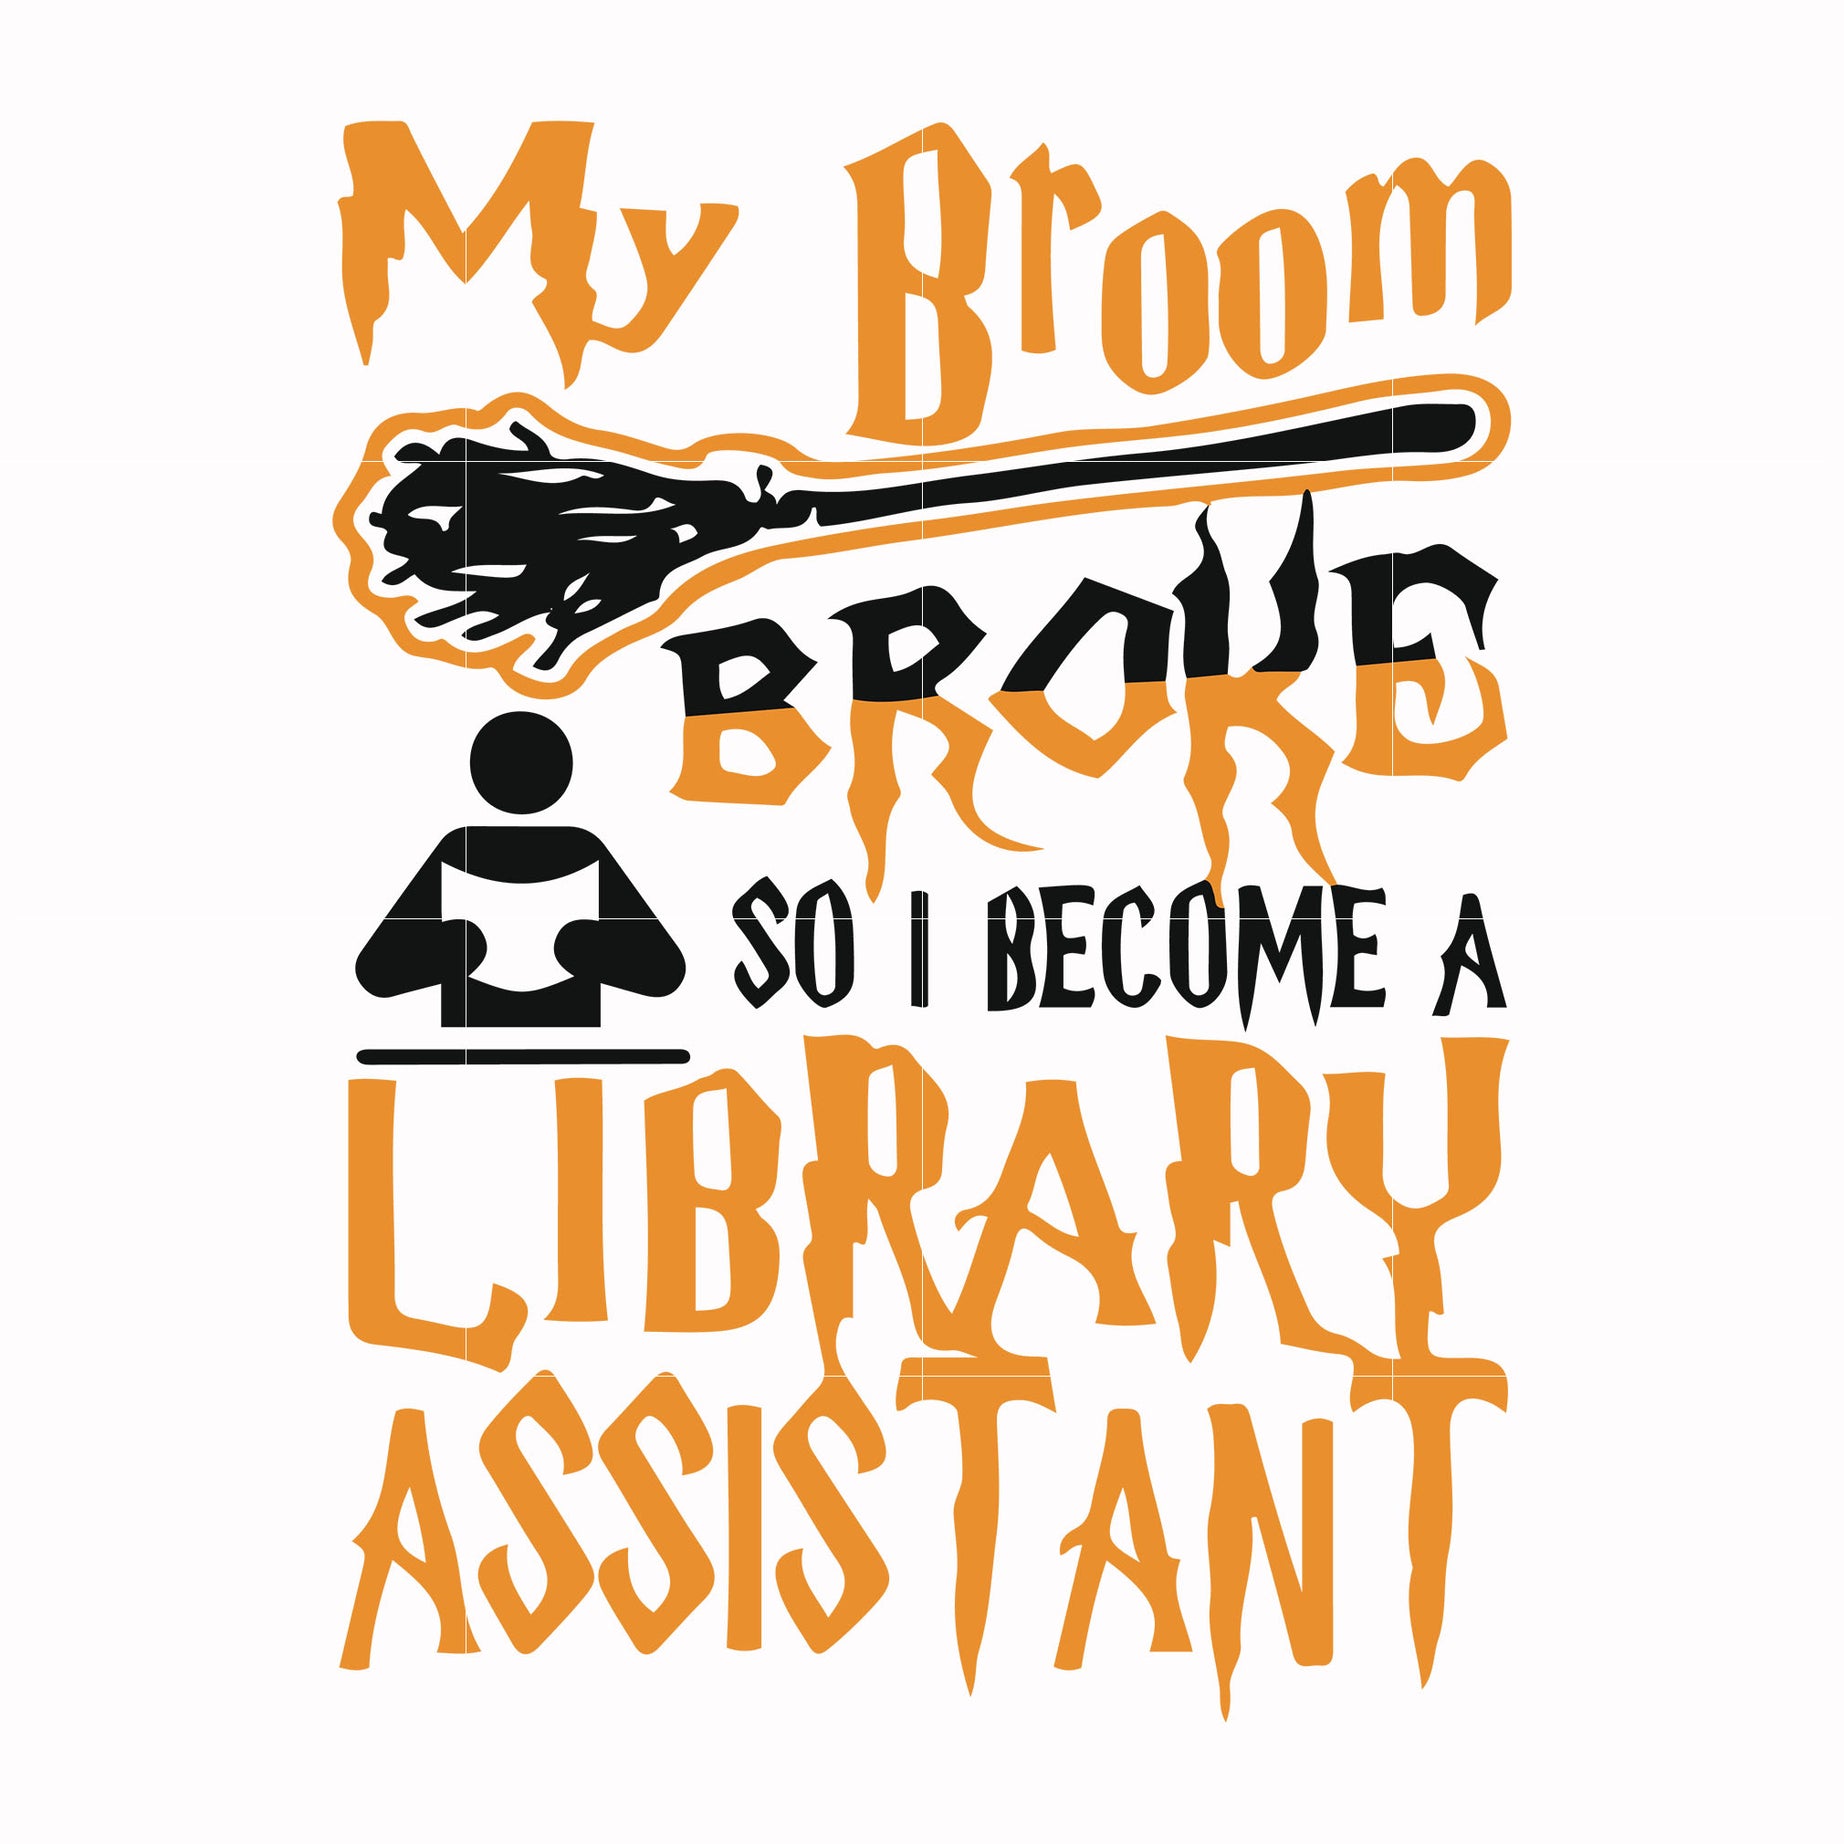 My broom broke so i become a library assistant svg, halloween svg, png, dxf, eps digital file HLW20072015